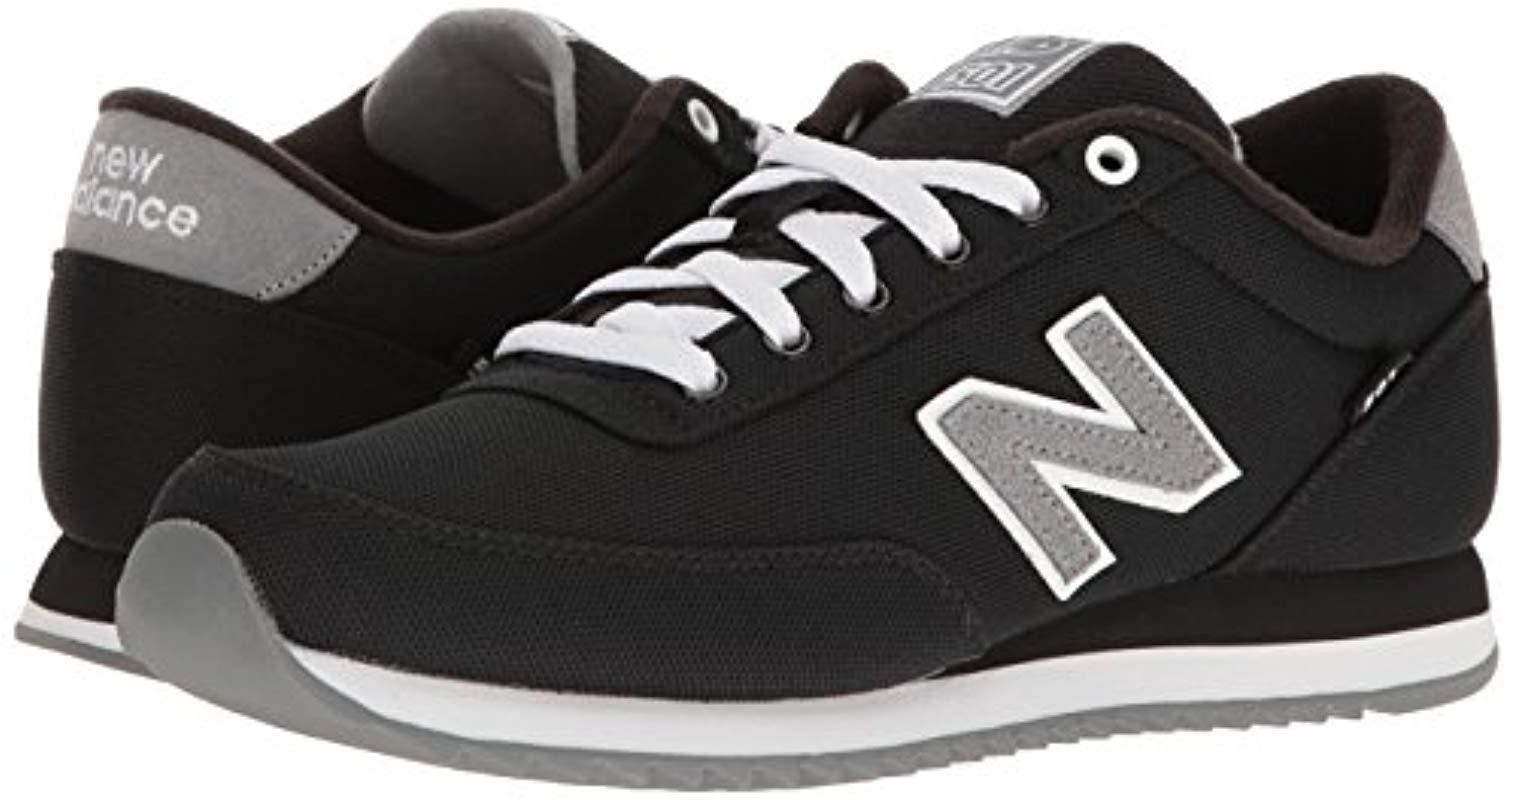 New Balance Mz501 Pique Polo Pack Fashion Sneaker in Black ...